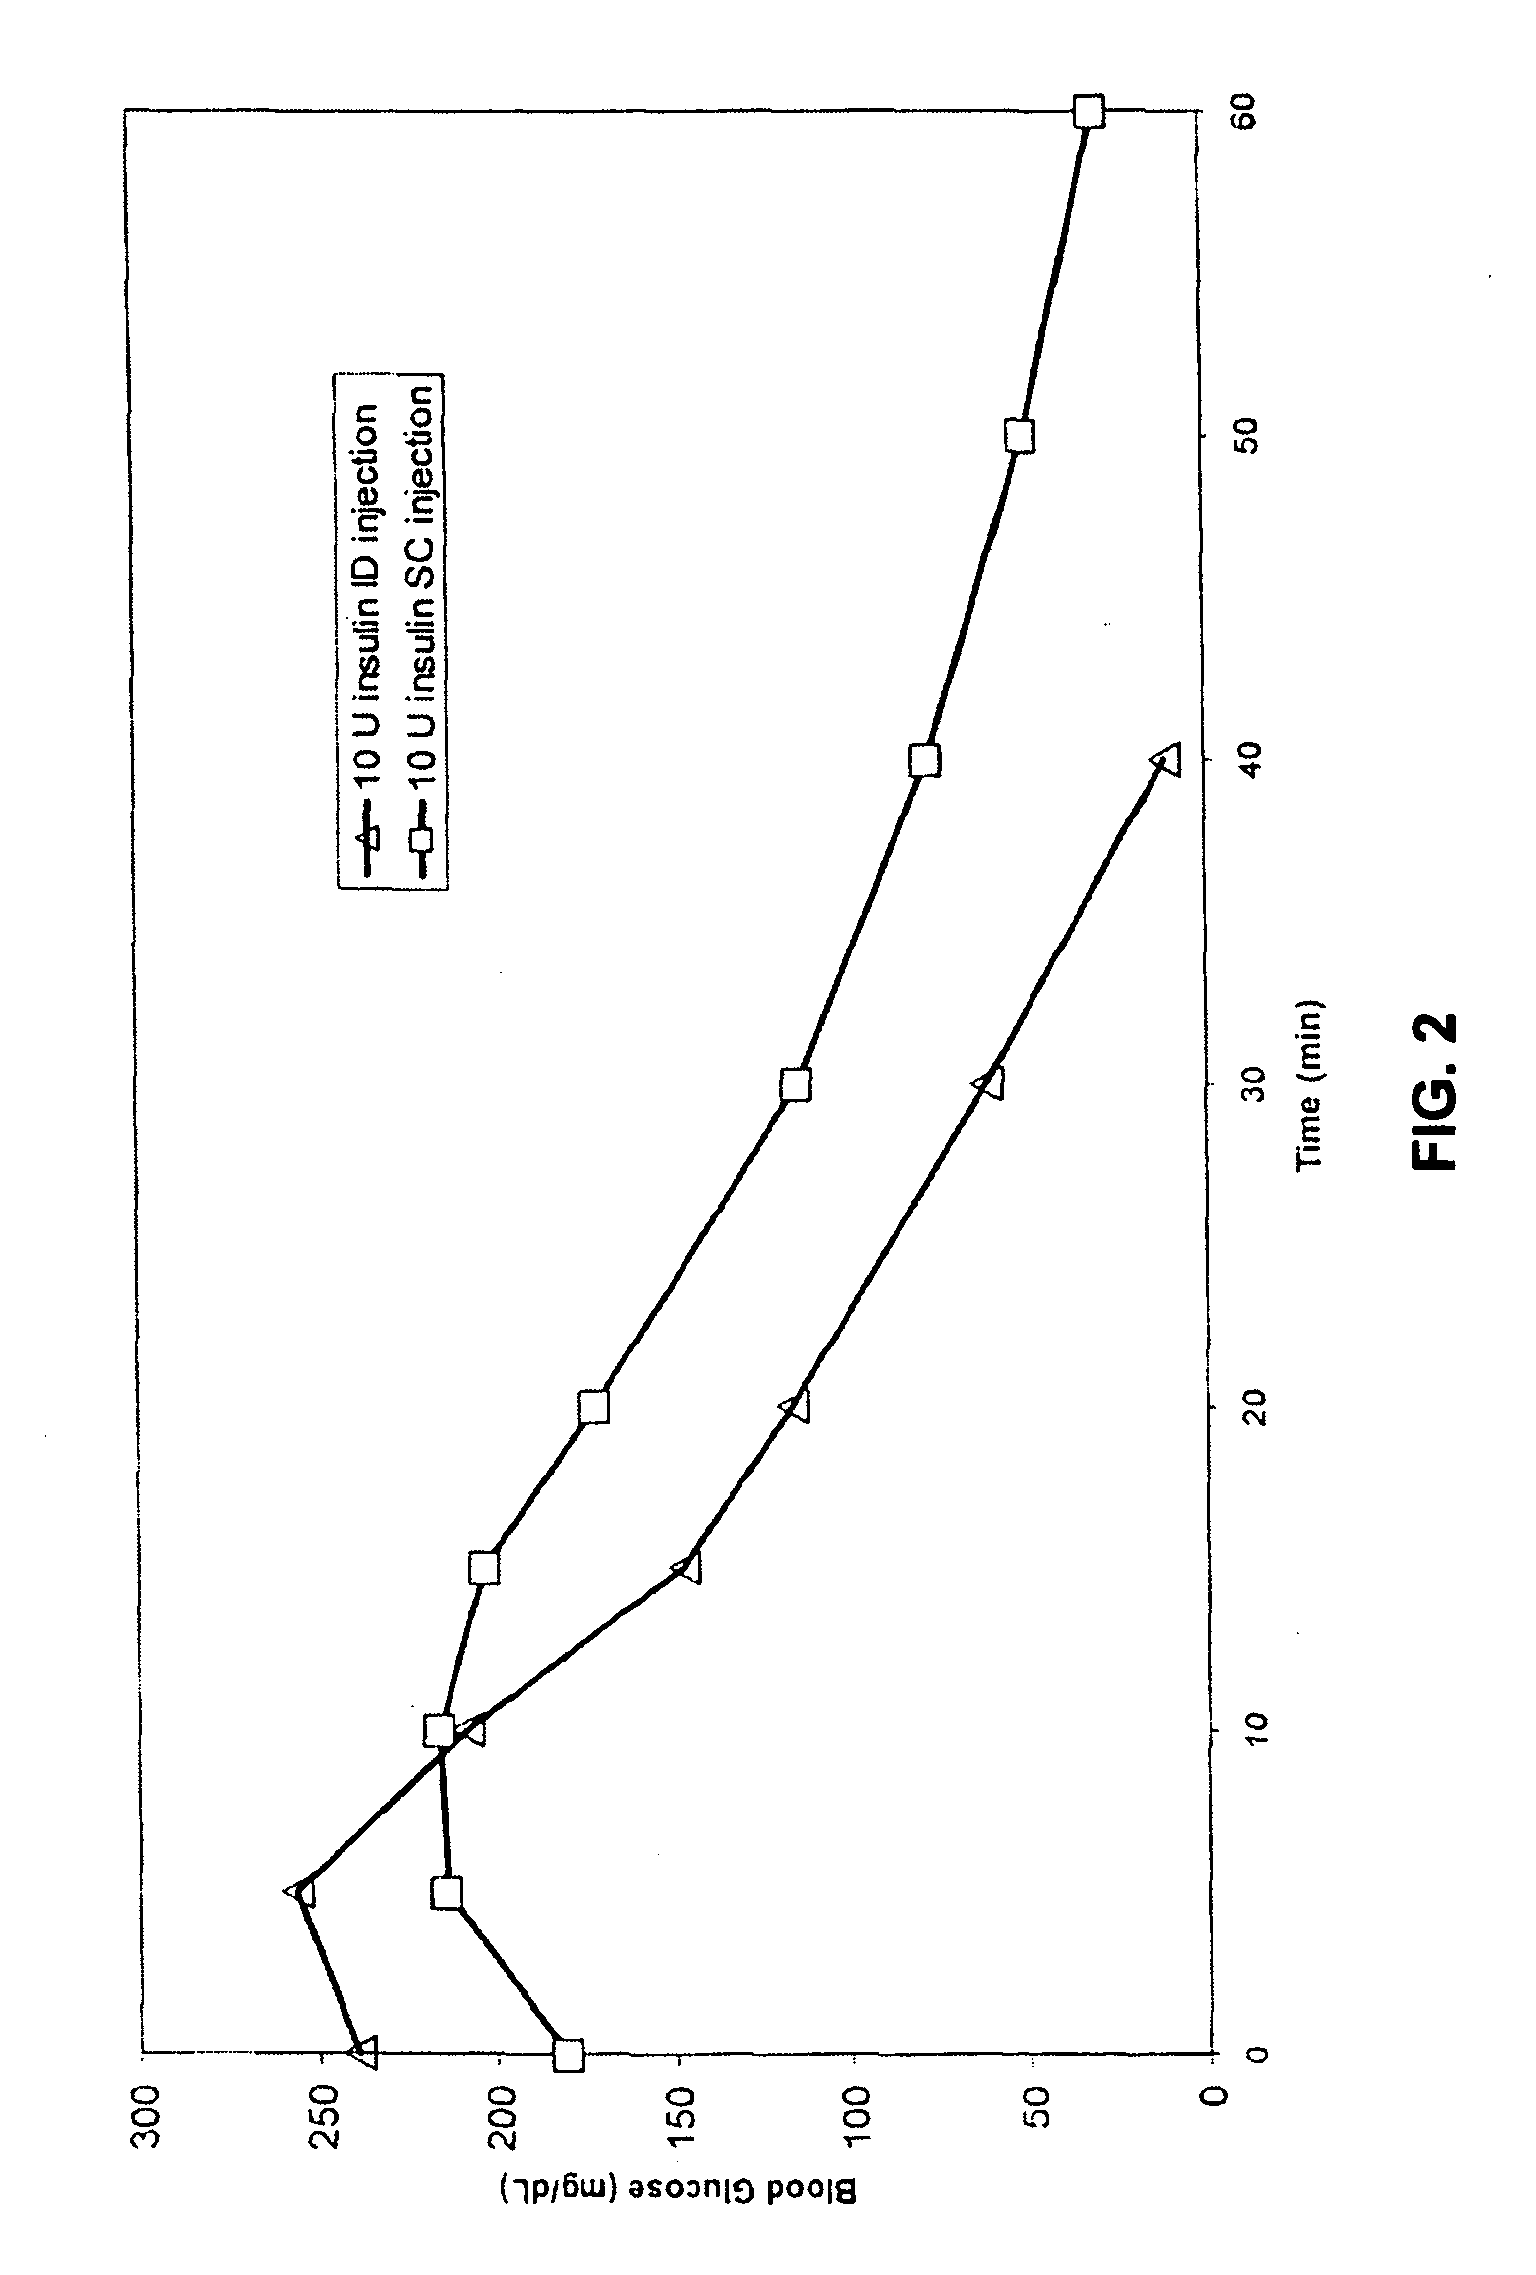 Method for delivering therapeutic proteins to the intradermal compartment